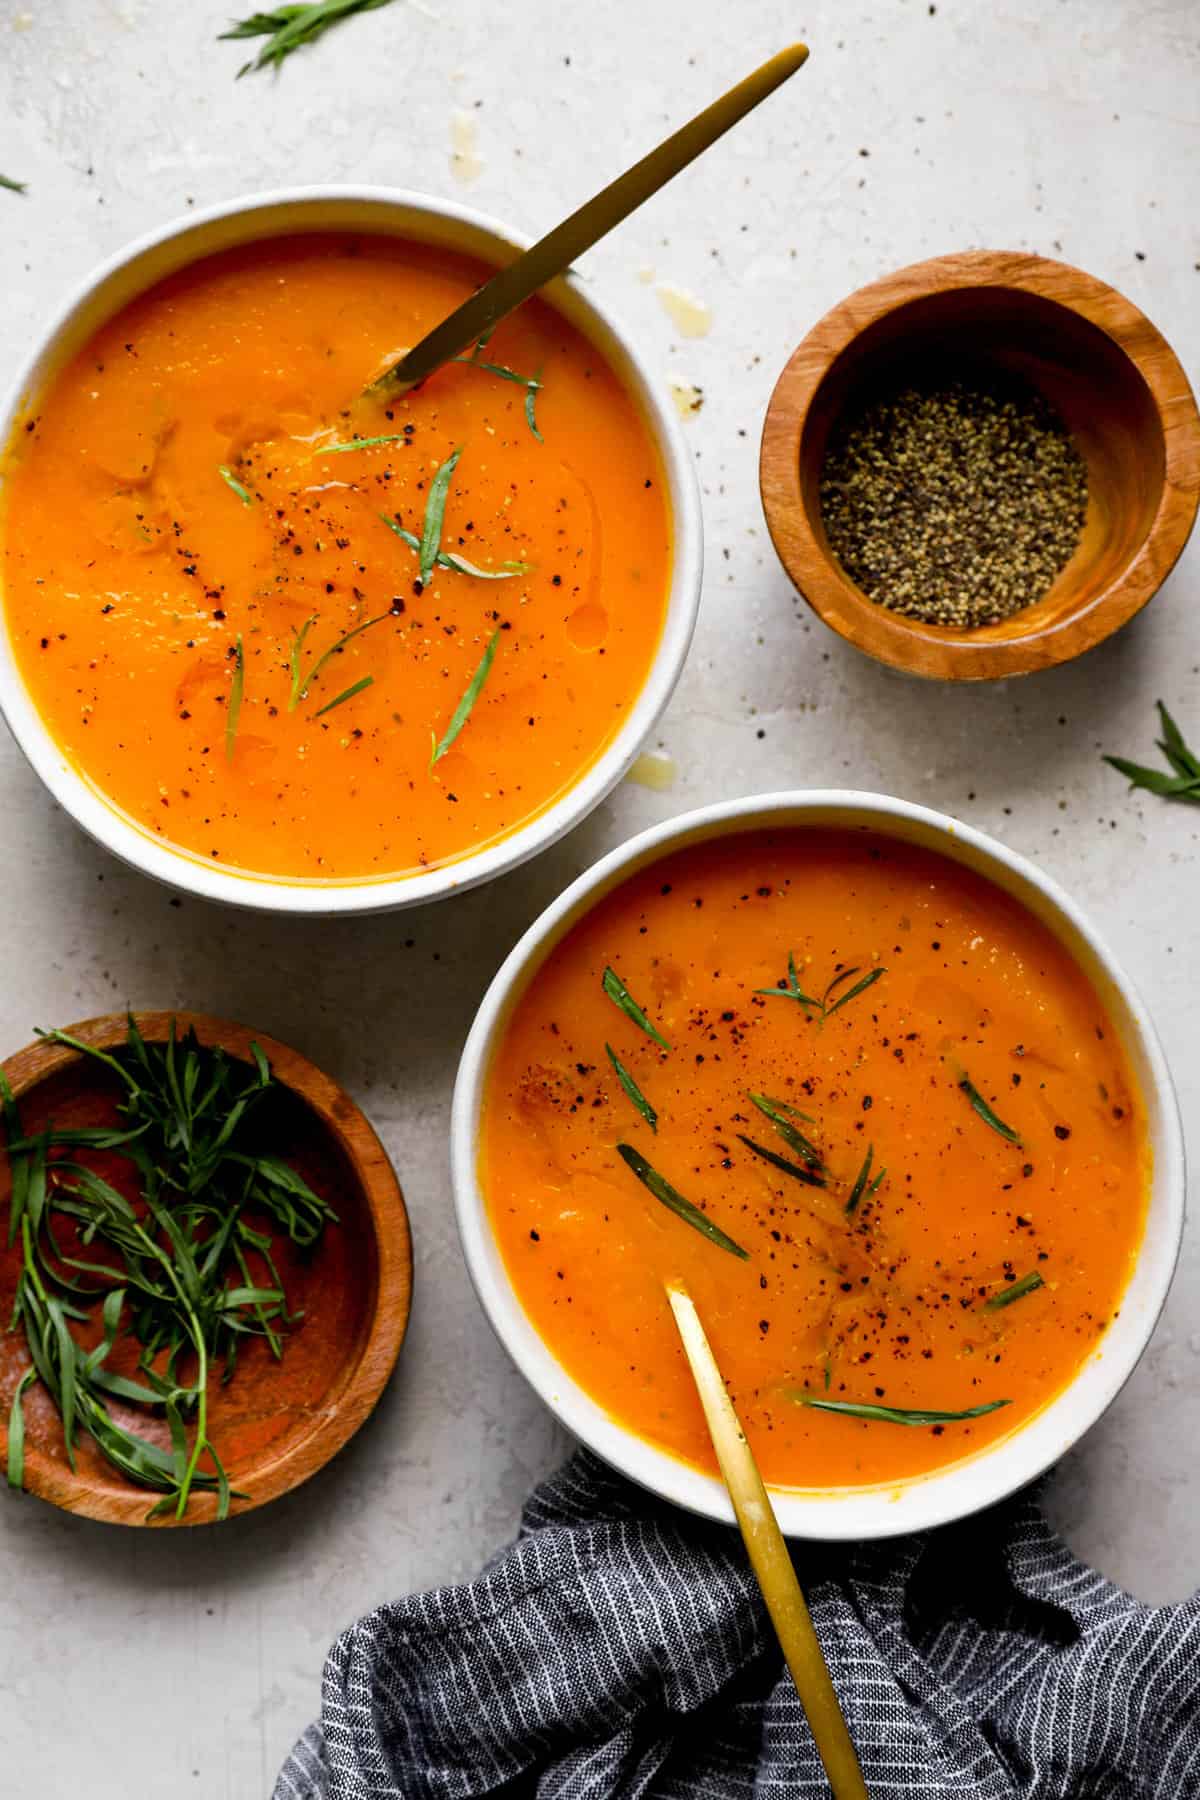 above image of two bowls of French squash soup garnished next to two bowls of fresh tarragon garnish.